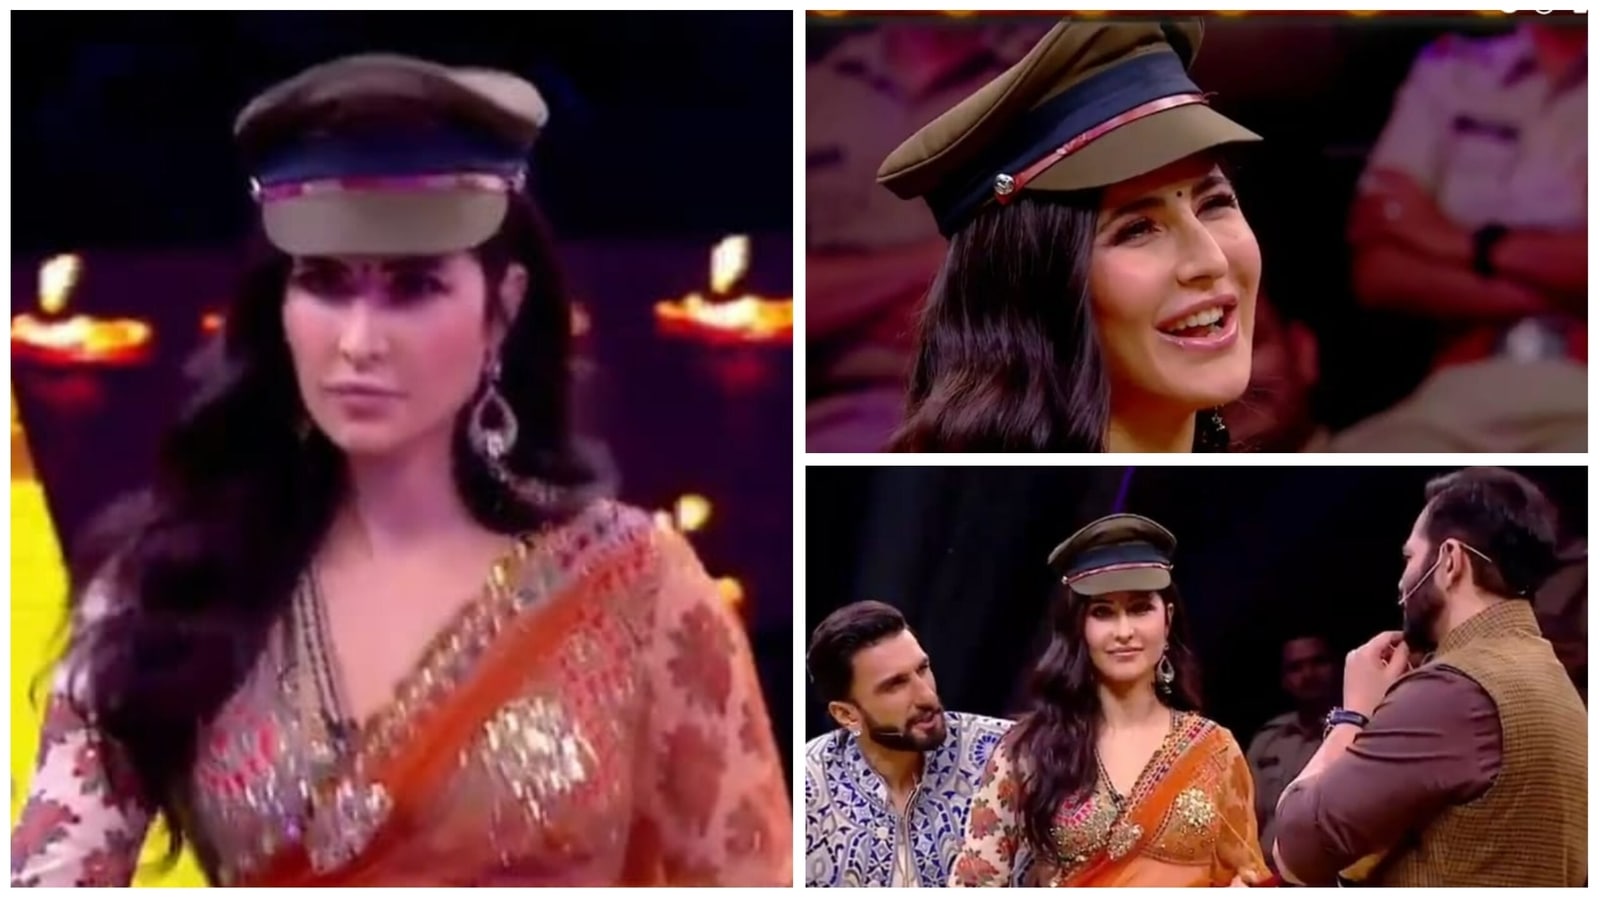 Before Deepika Padukone, Katrina Kaif 'auditioned' for female cop's role in Rohit Shetty film. Watch